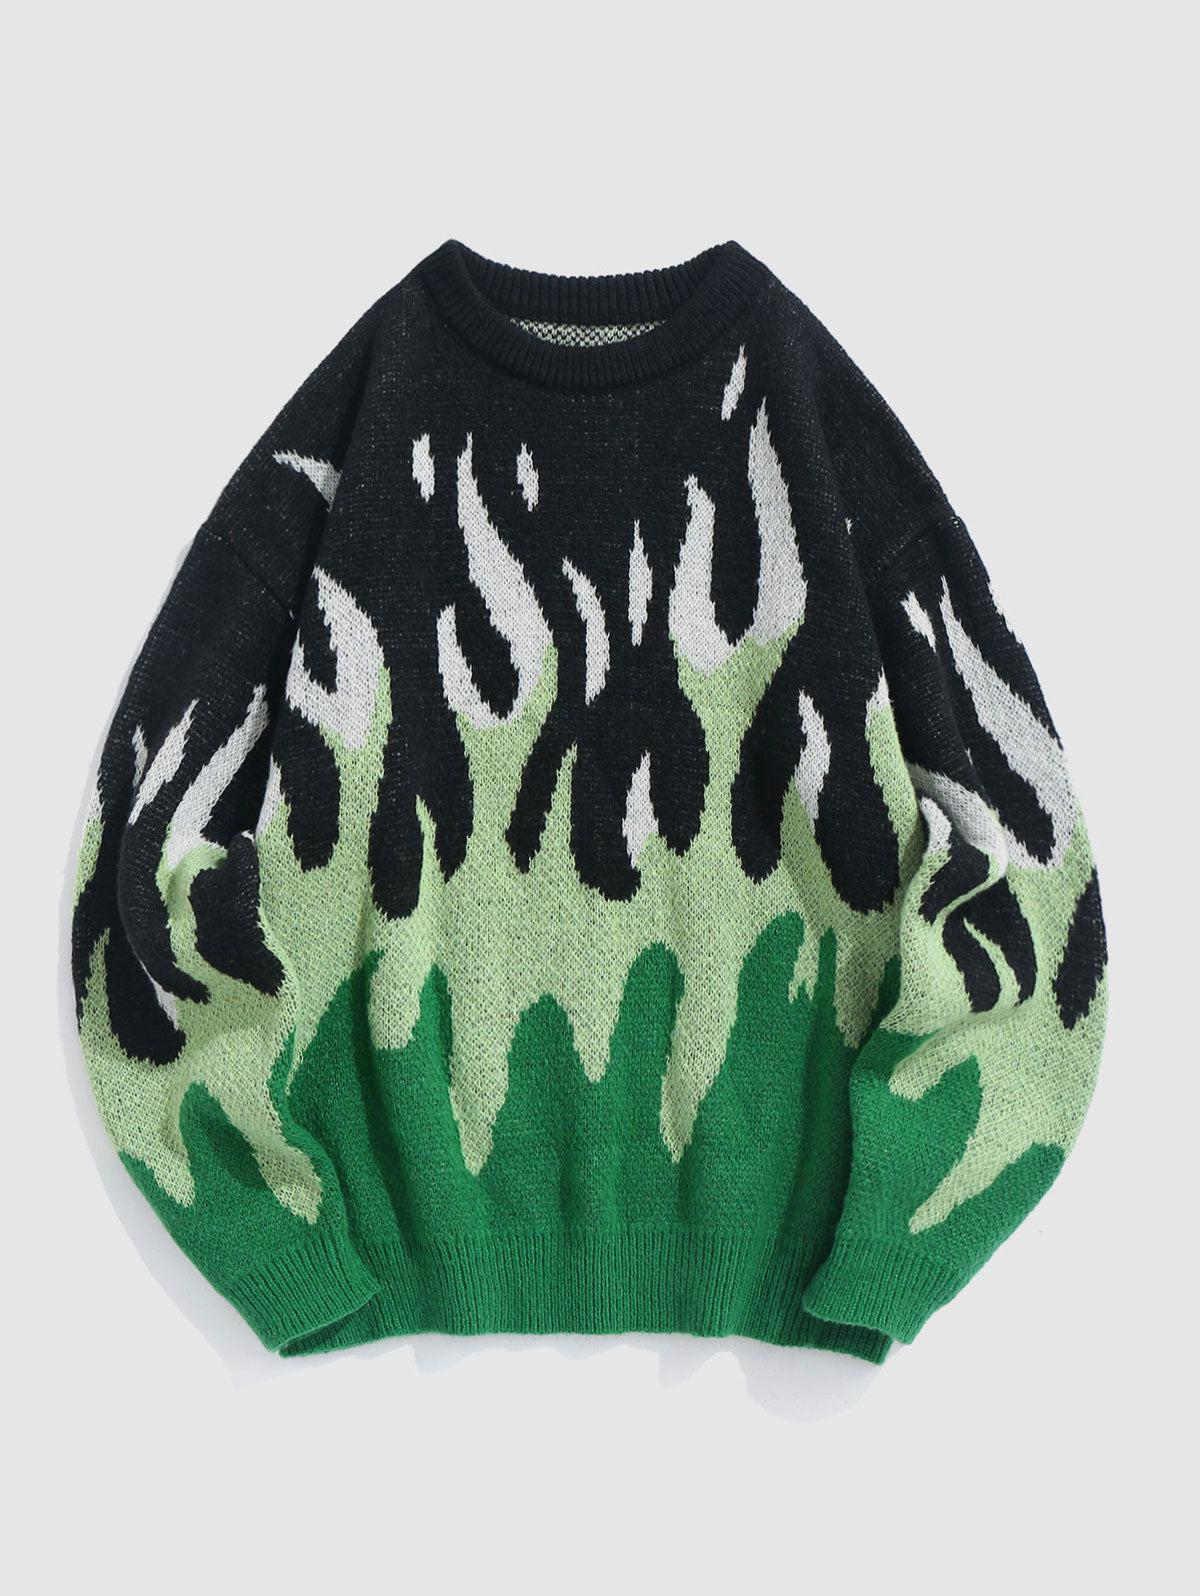 Indie Flame Knitted Sweater-Green-S-Mauv Studio